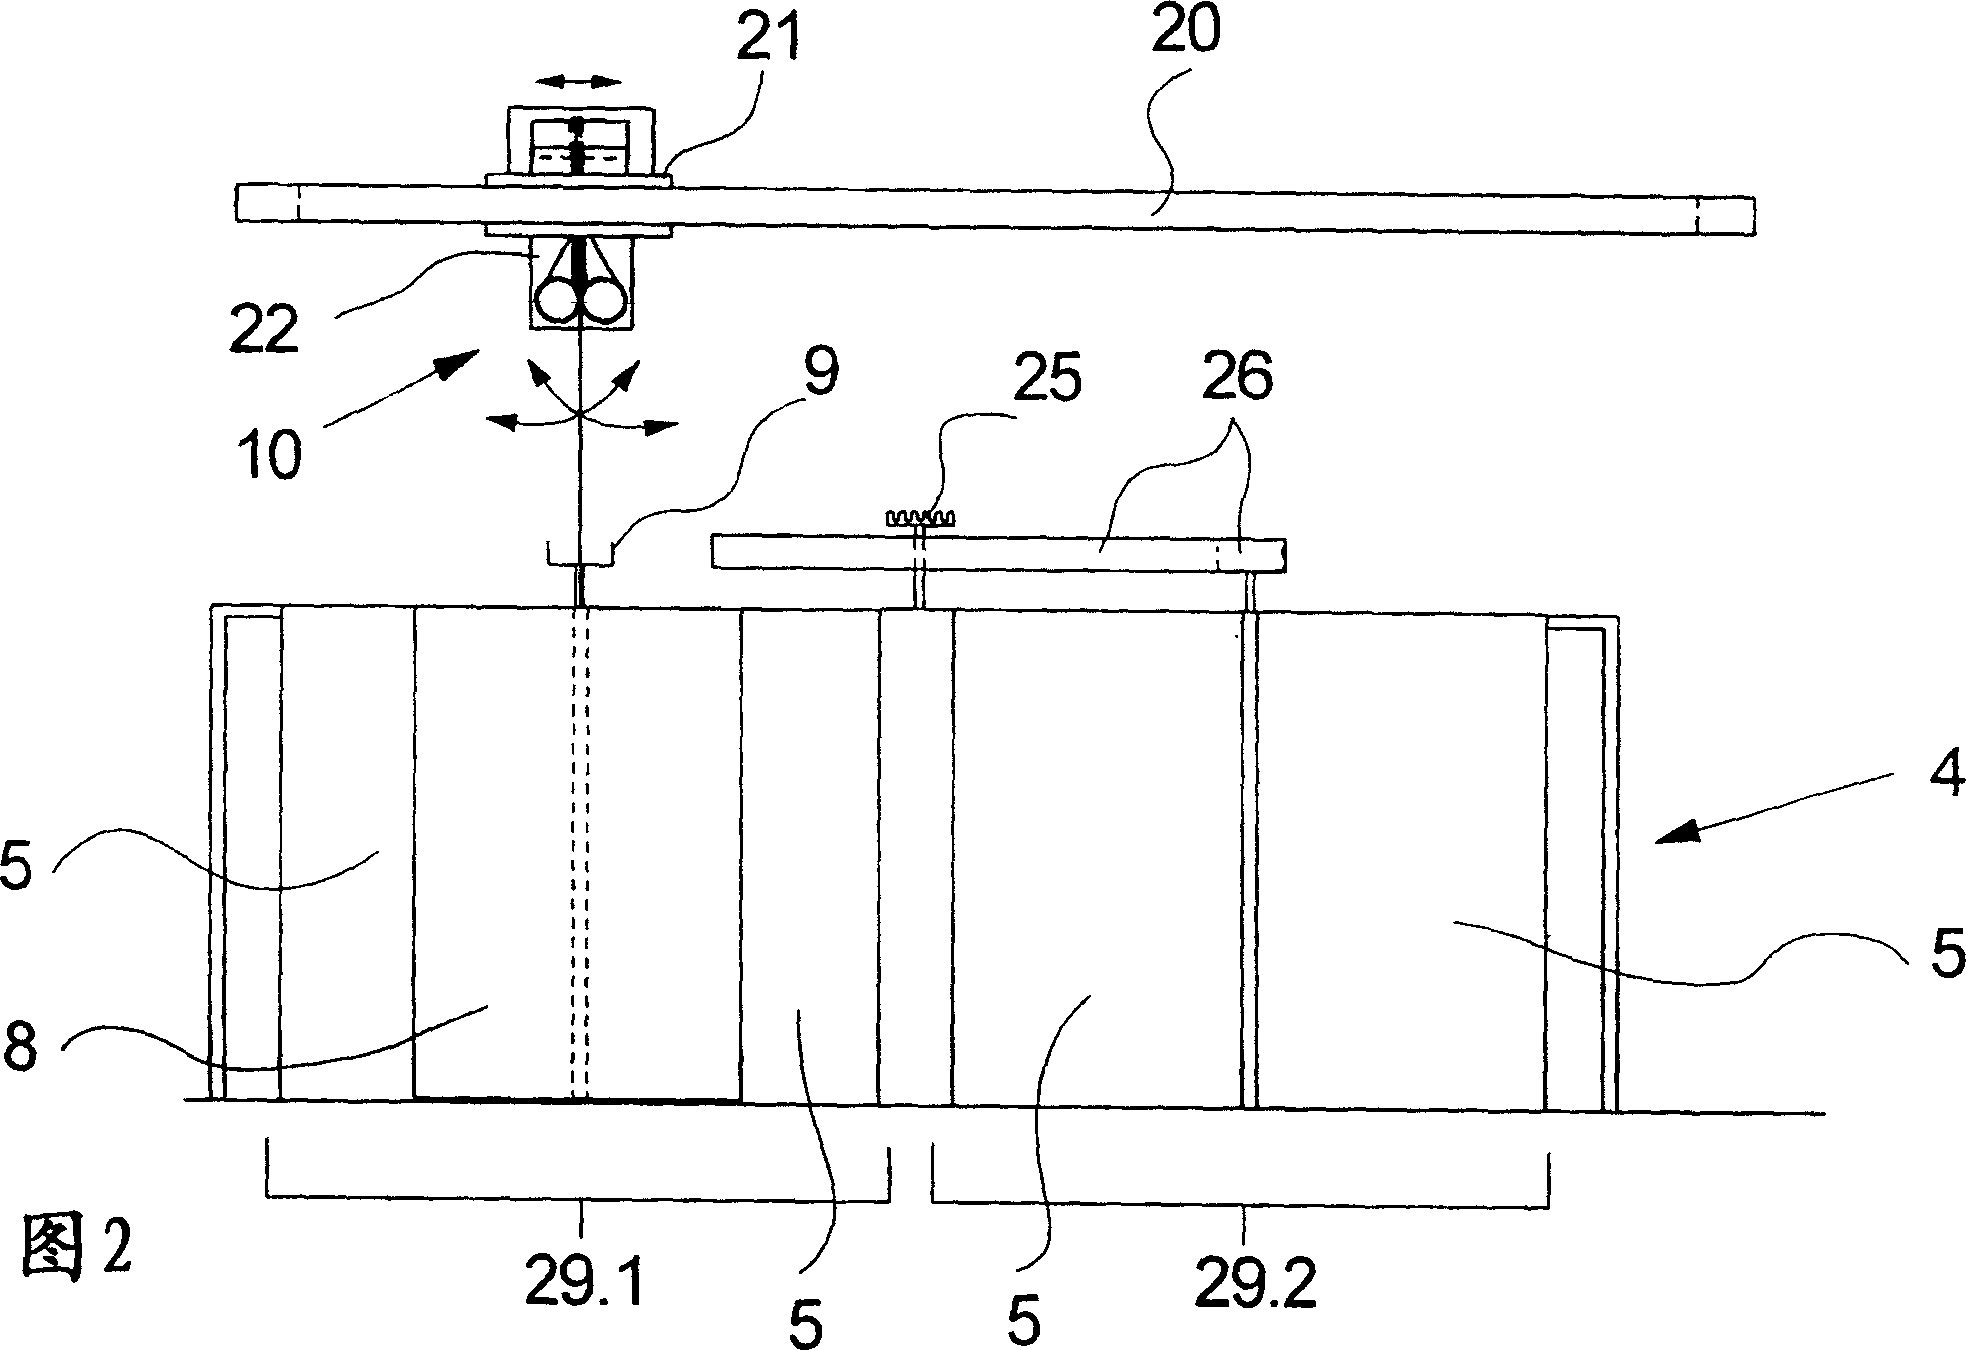 Method and device for producing and storing tows